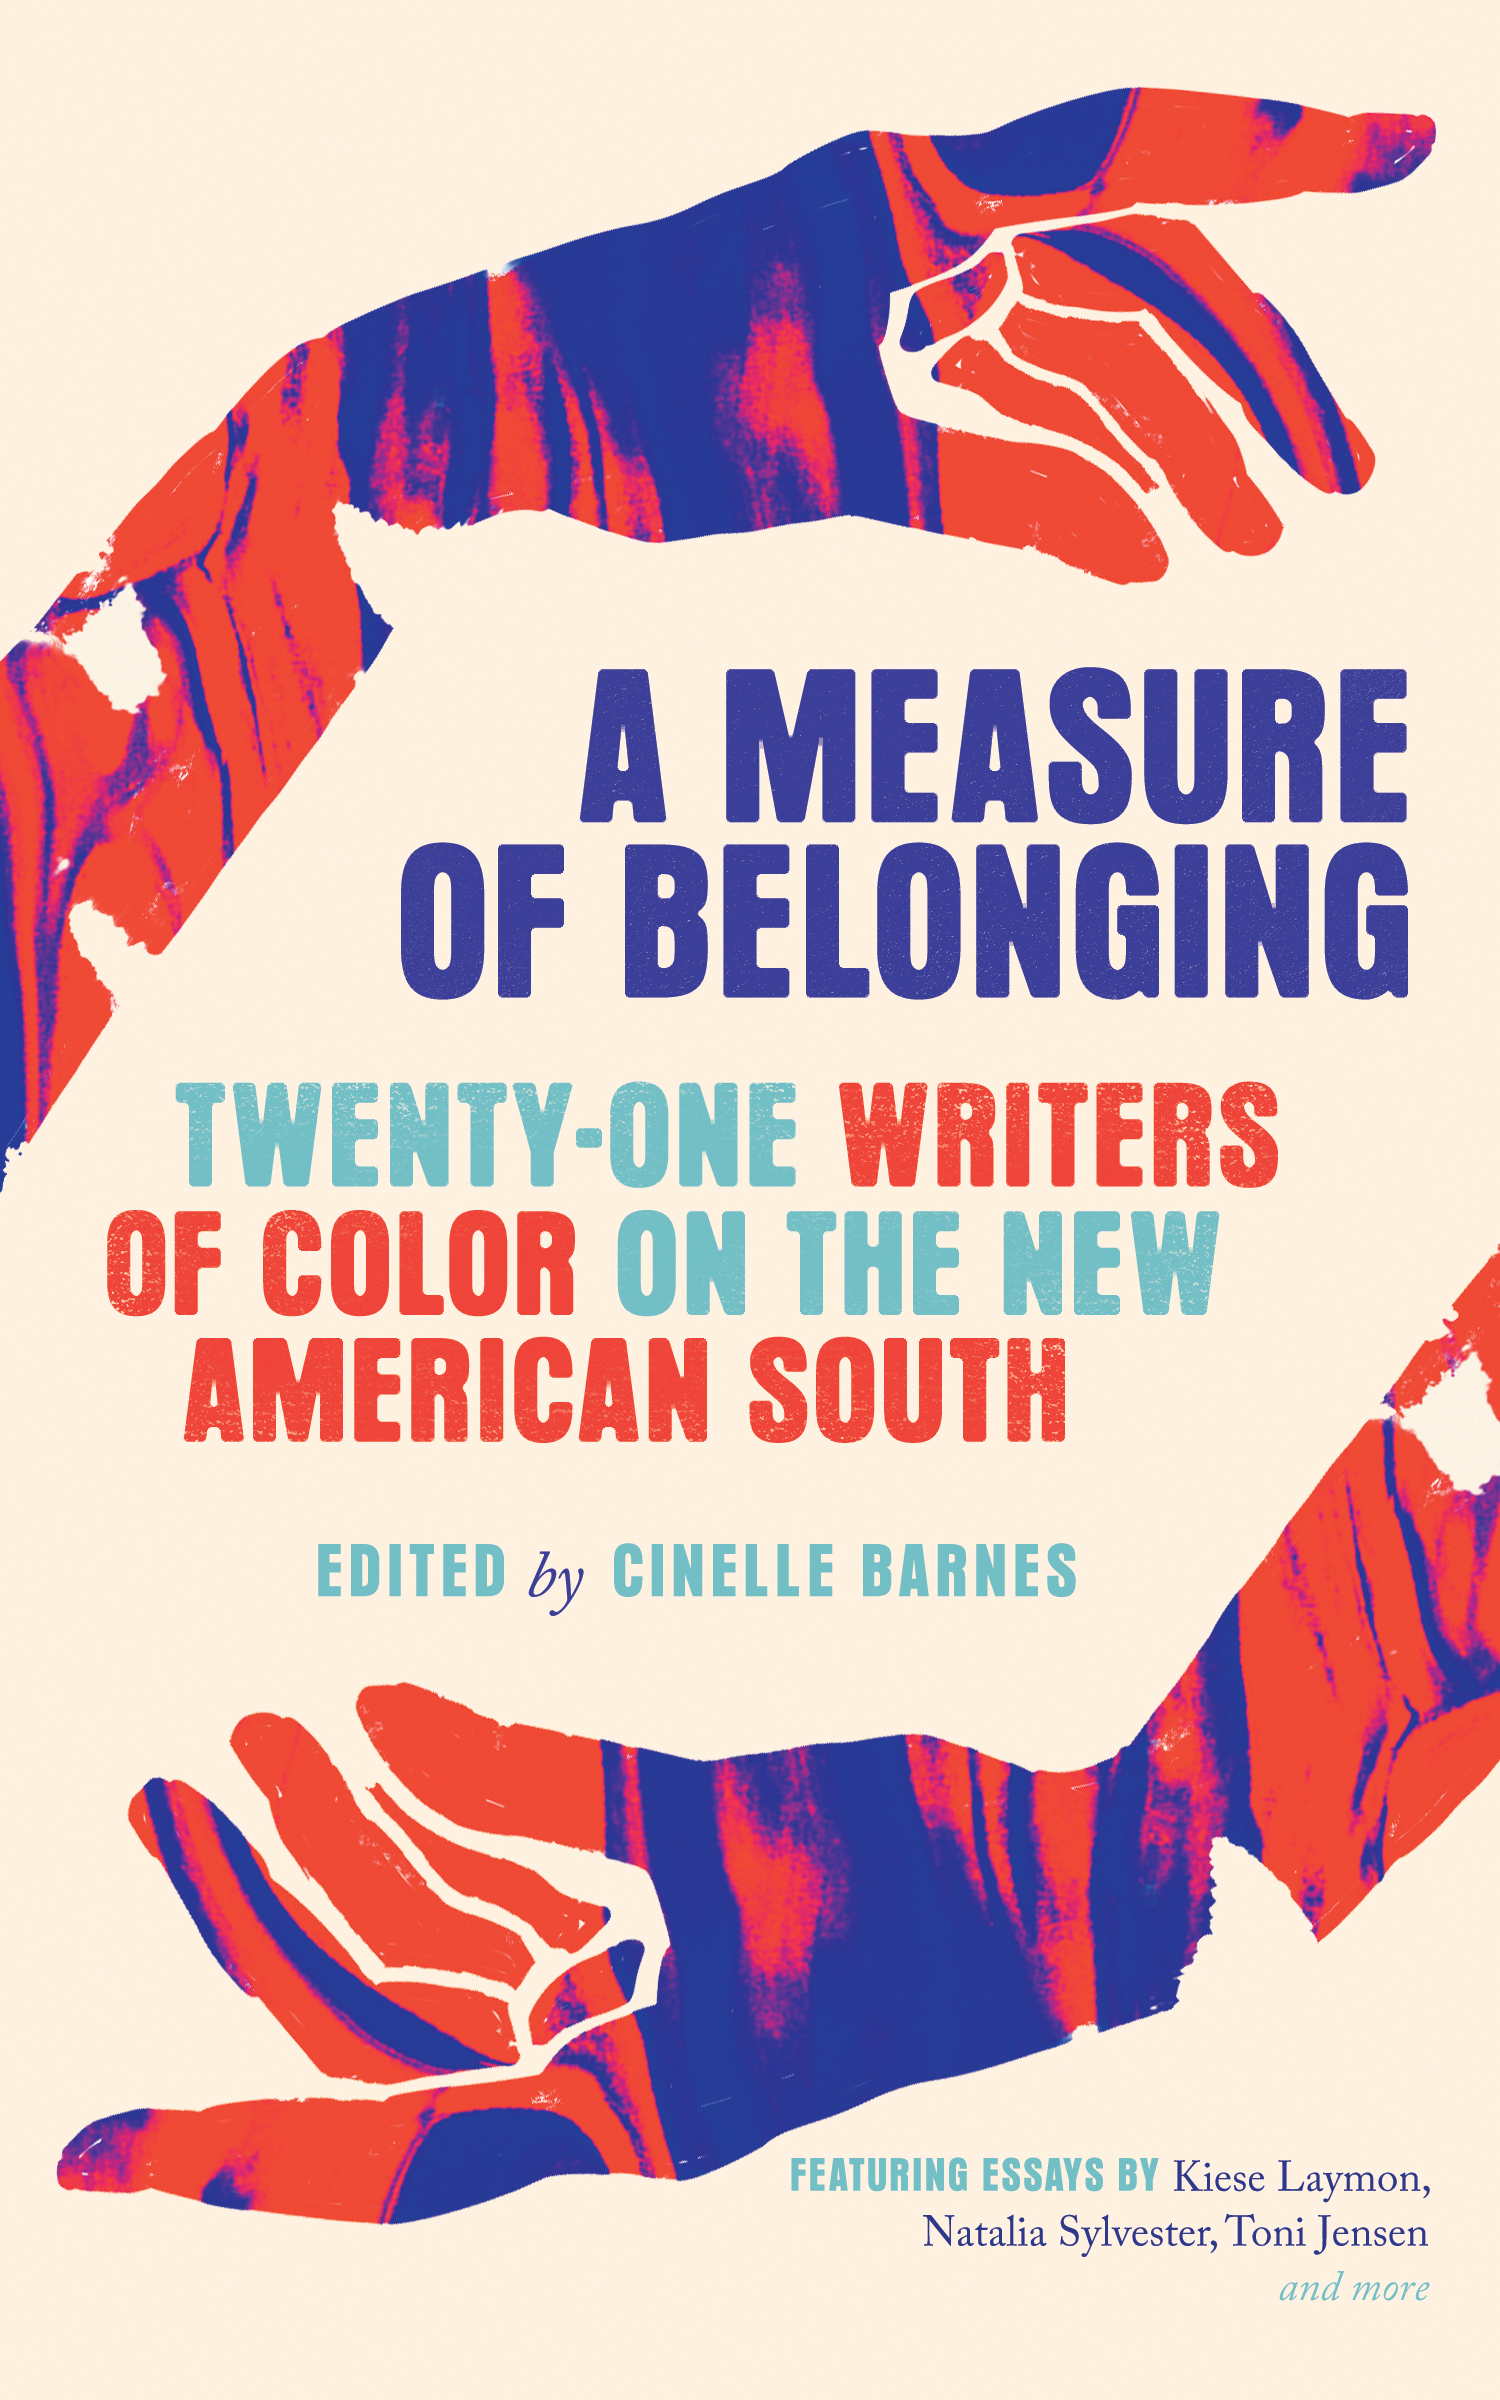 A Measure of Belonging: Twenty-One Writers of Color on the New American South